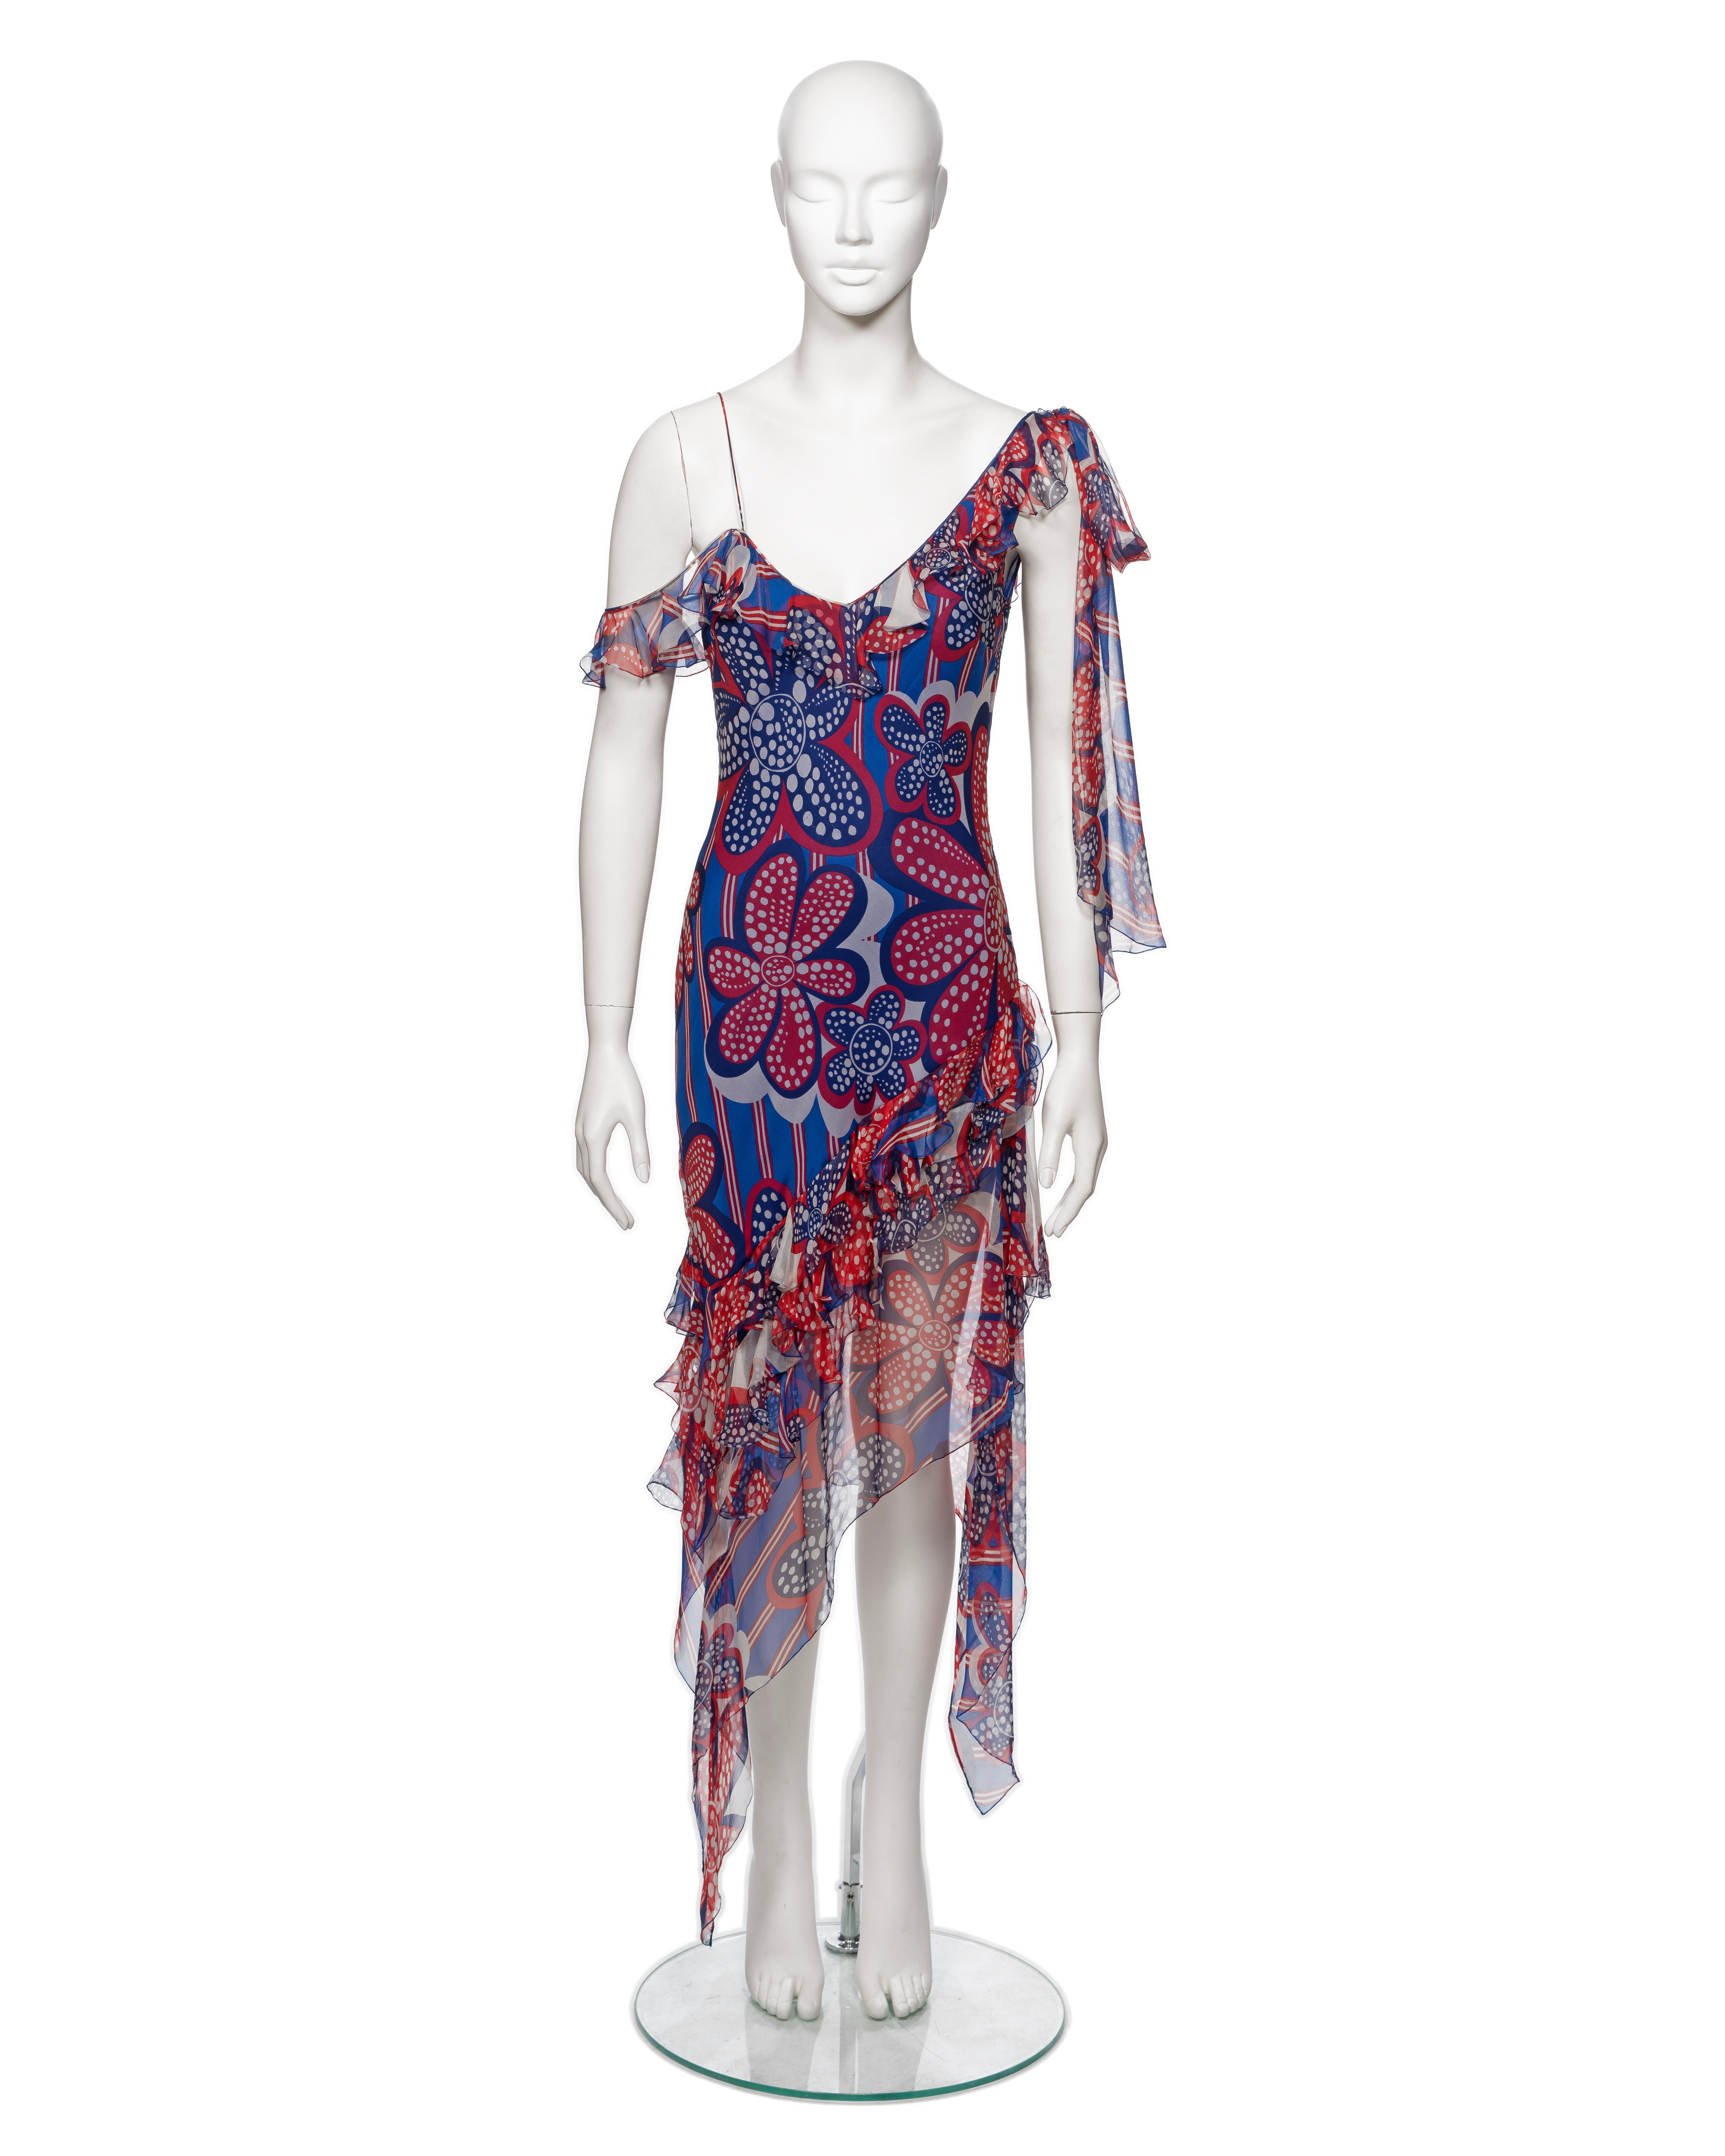 ▪ Brand: John Galliano
▪ Creative Director: John Galliano
▪ Collection: Spring-Summer 2002
▪ Fabric: Silk
▪ Details: Red, blue and white 70's inspired floral print, ruffled trim, asymmetric hemline, two long ties at the shoulder, lined with blue